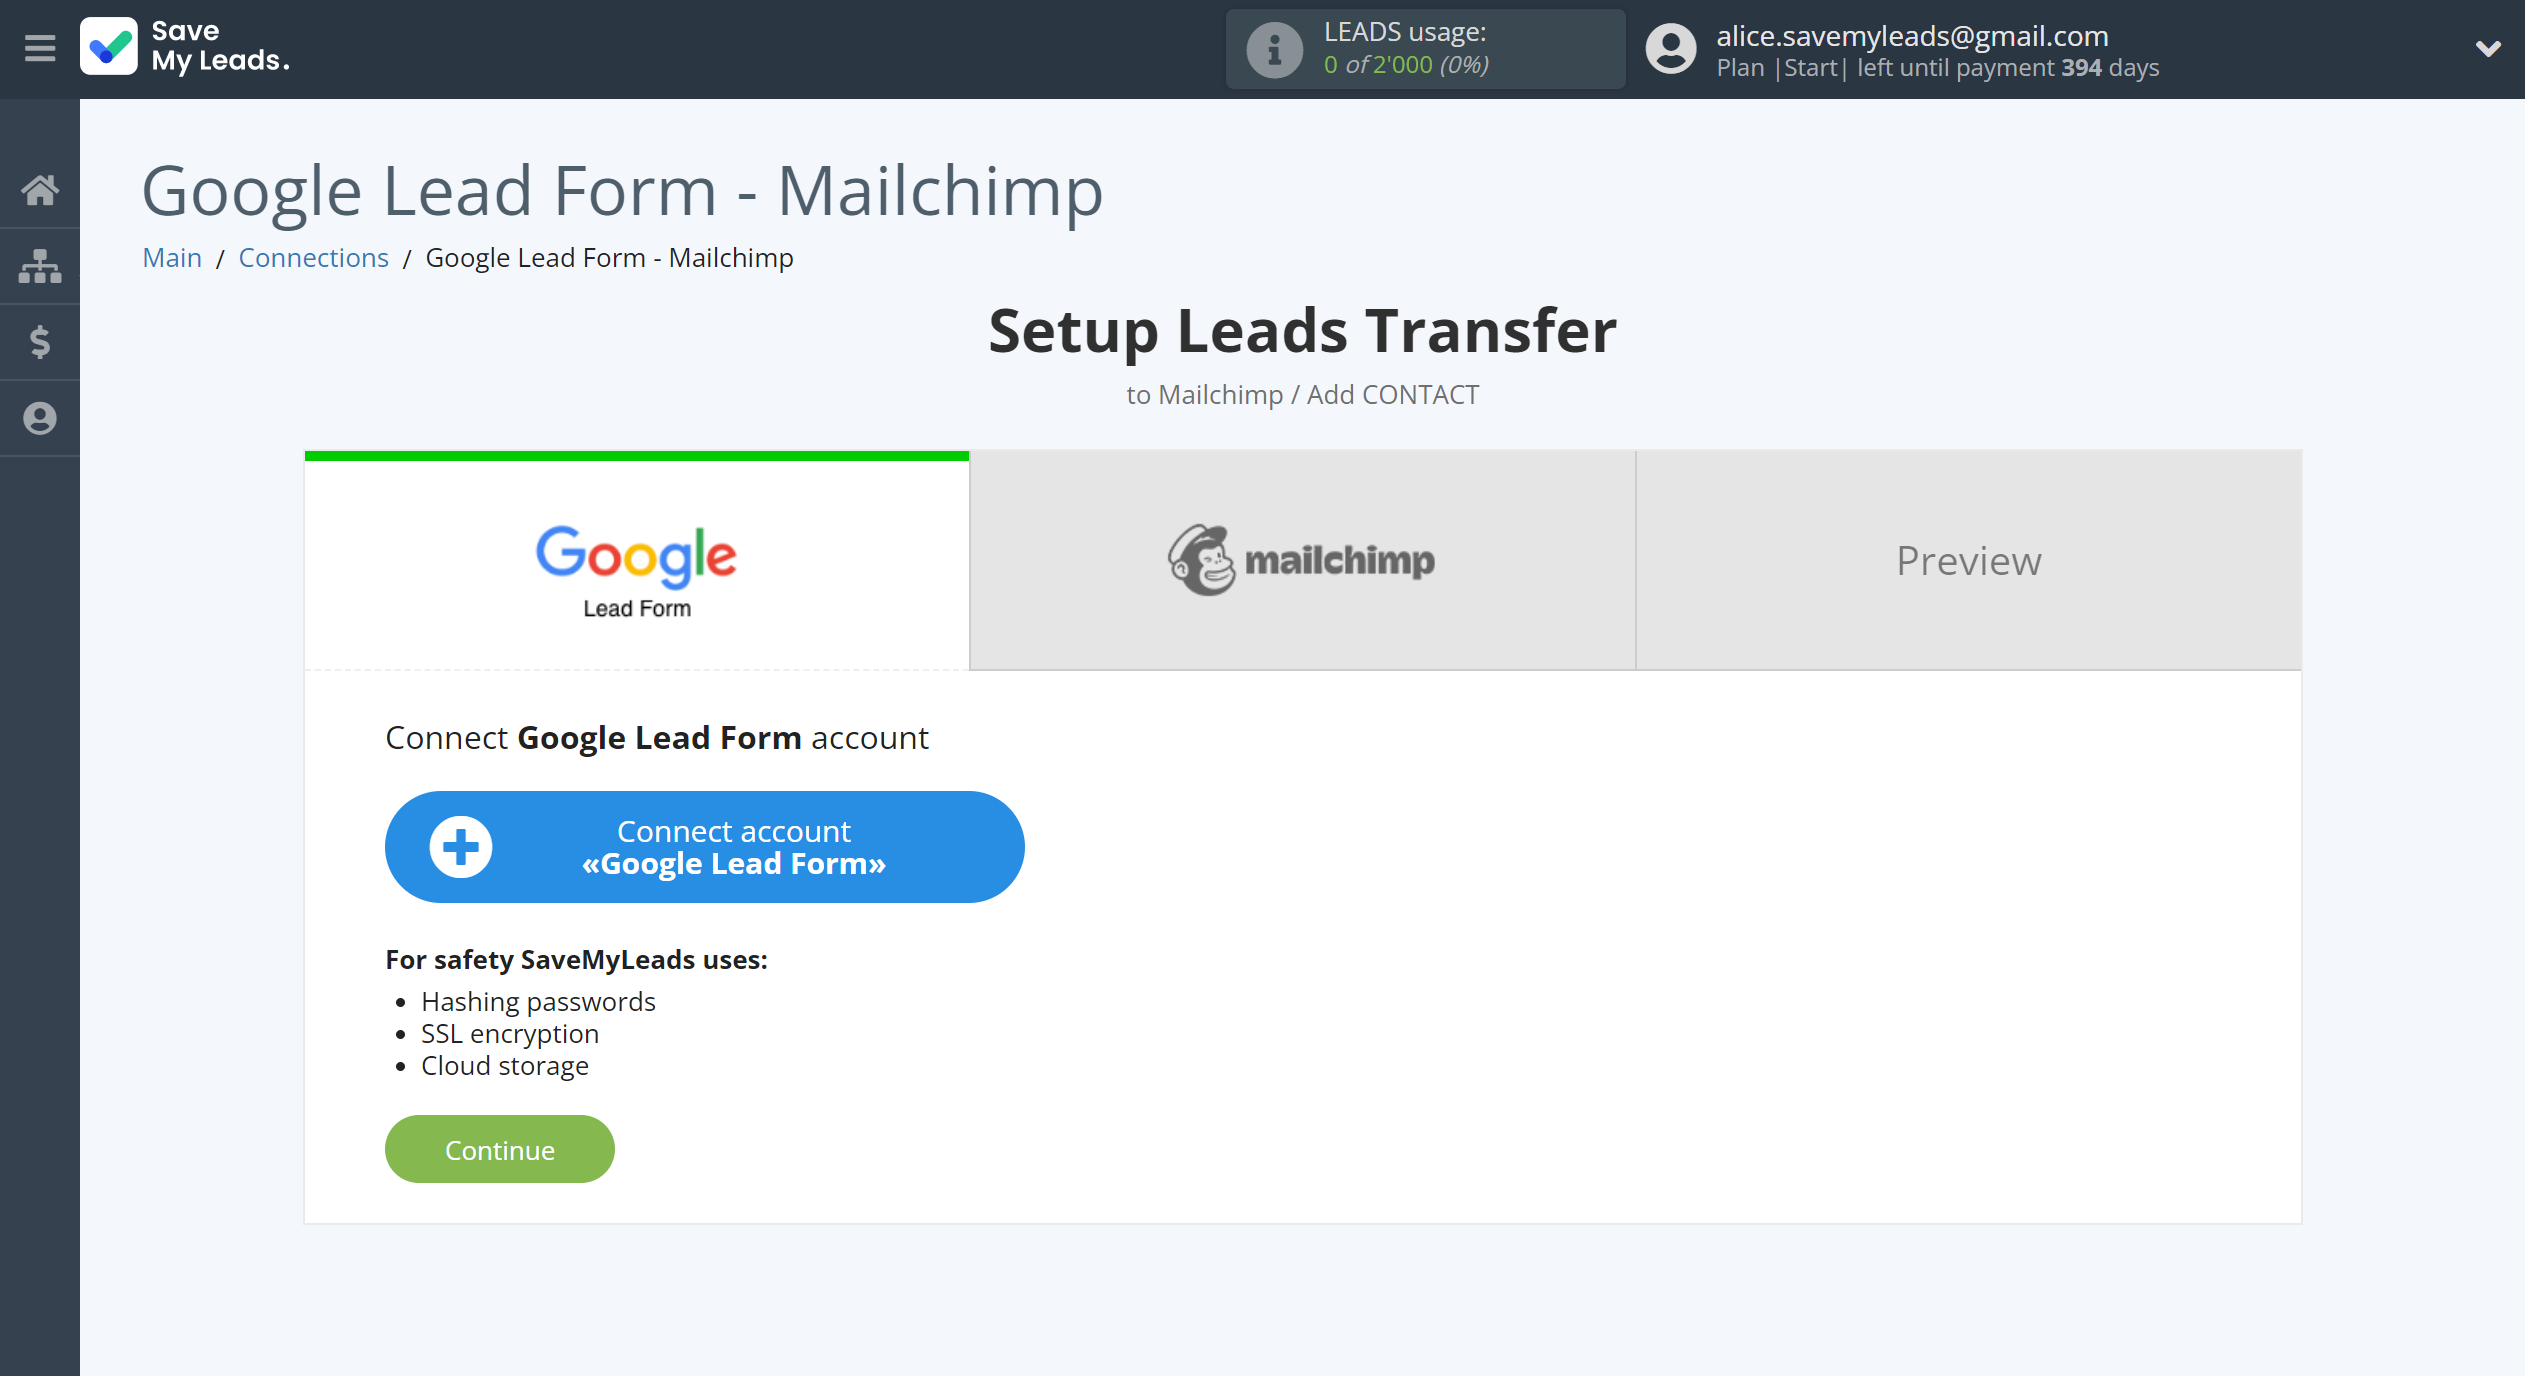 How to Connect Google Lead Form with MailChimp | Data Source account connection